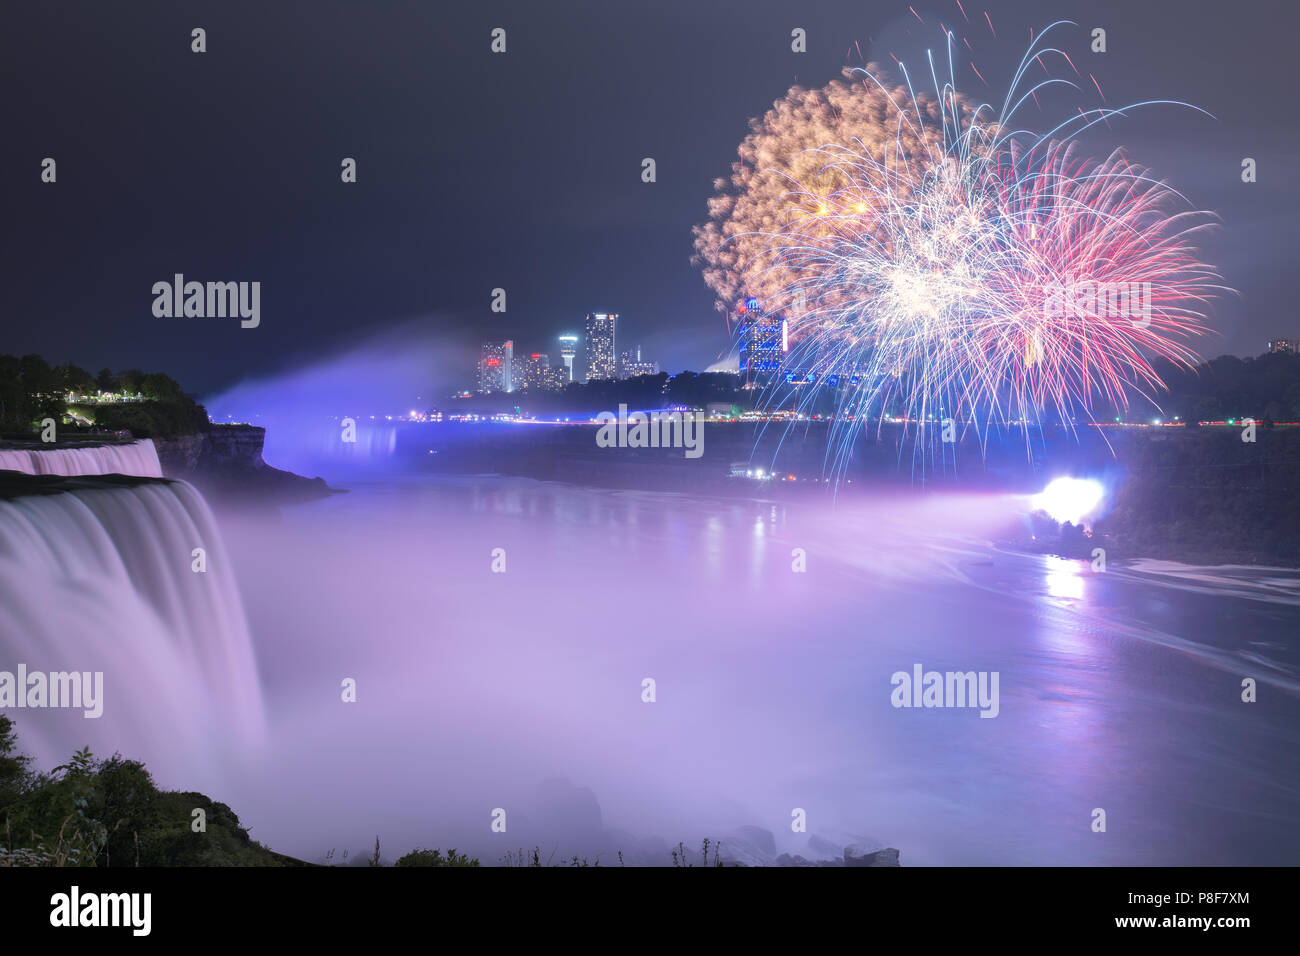 Niagara Falls lit at night by colorful fireworks Stock Photo